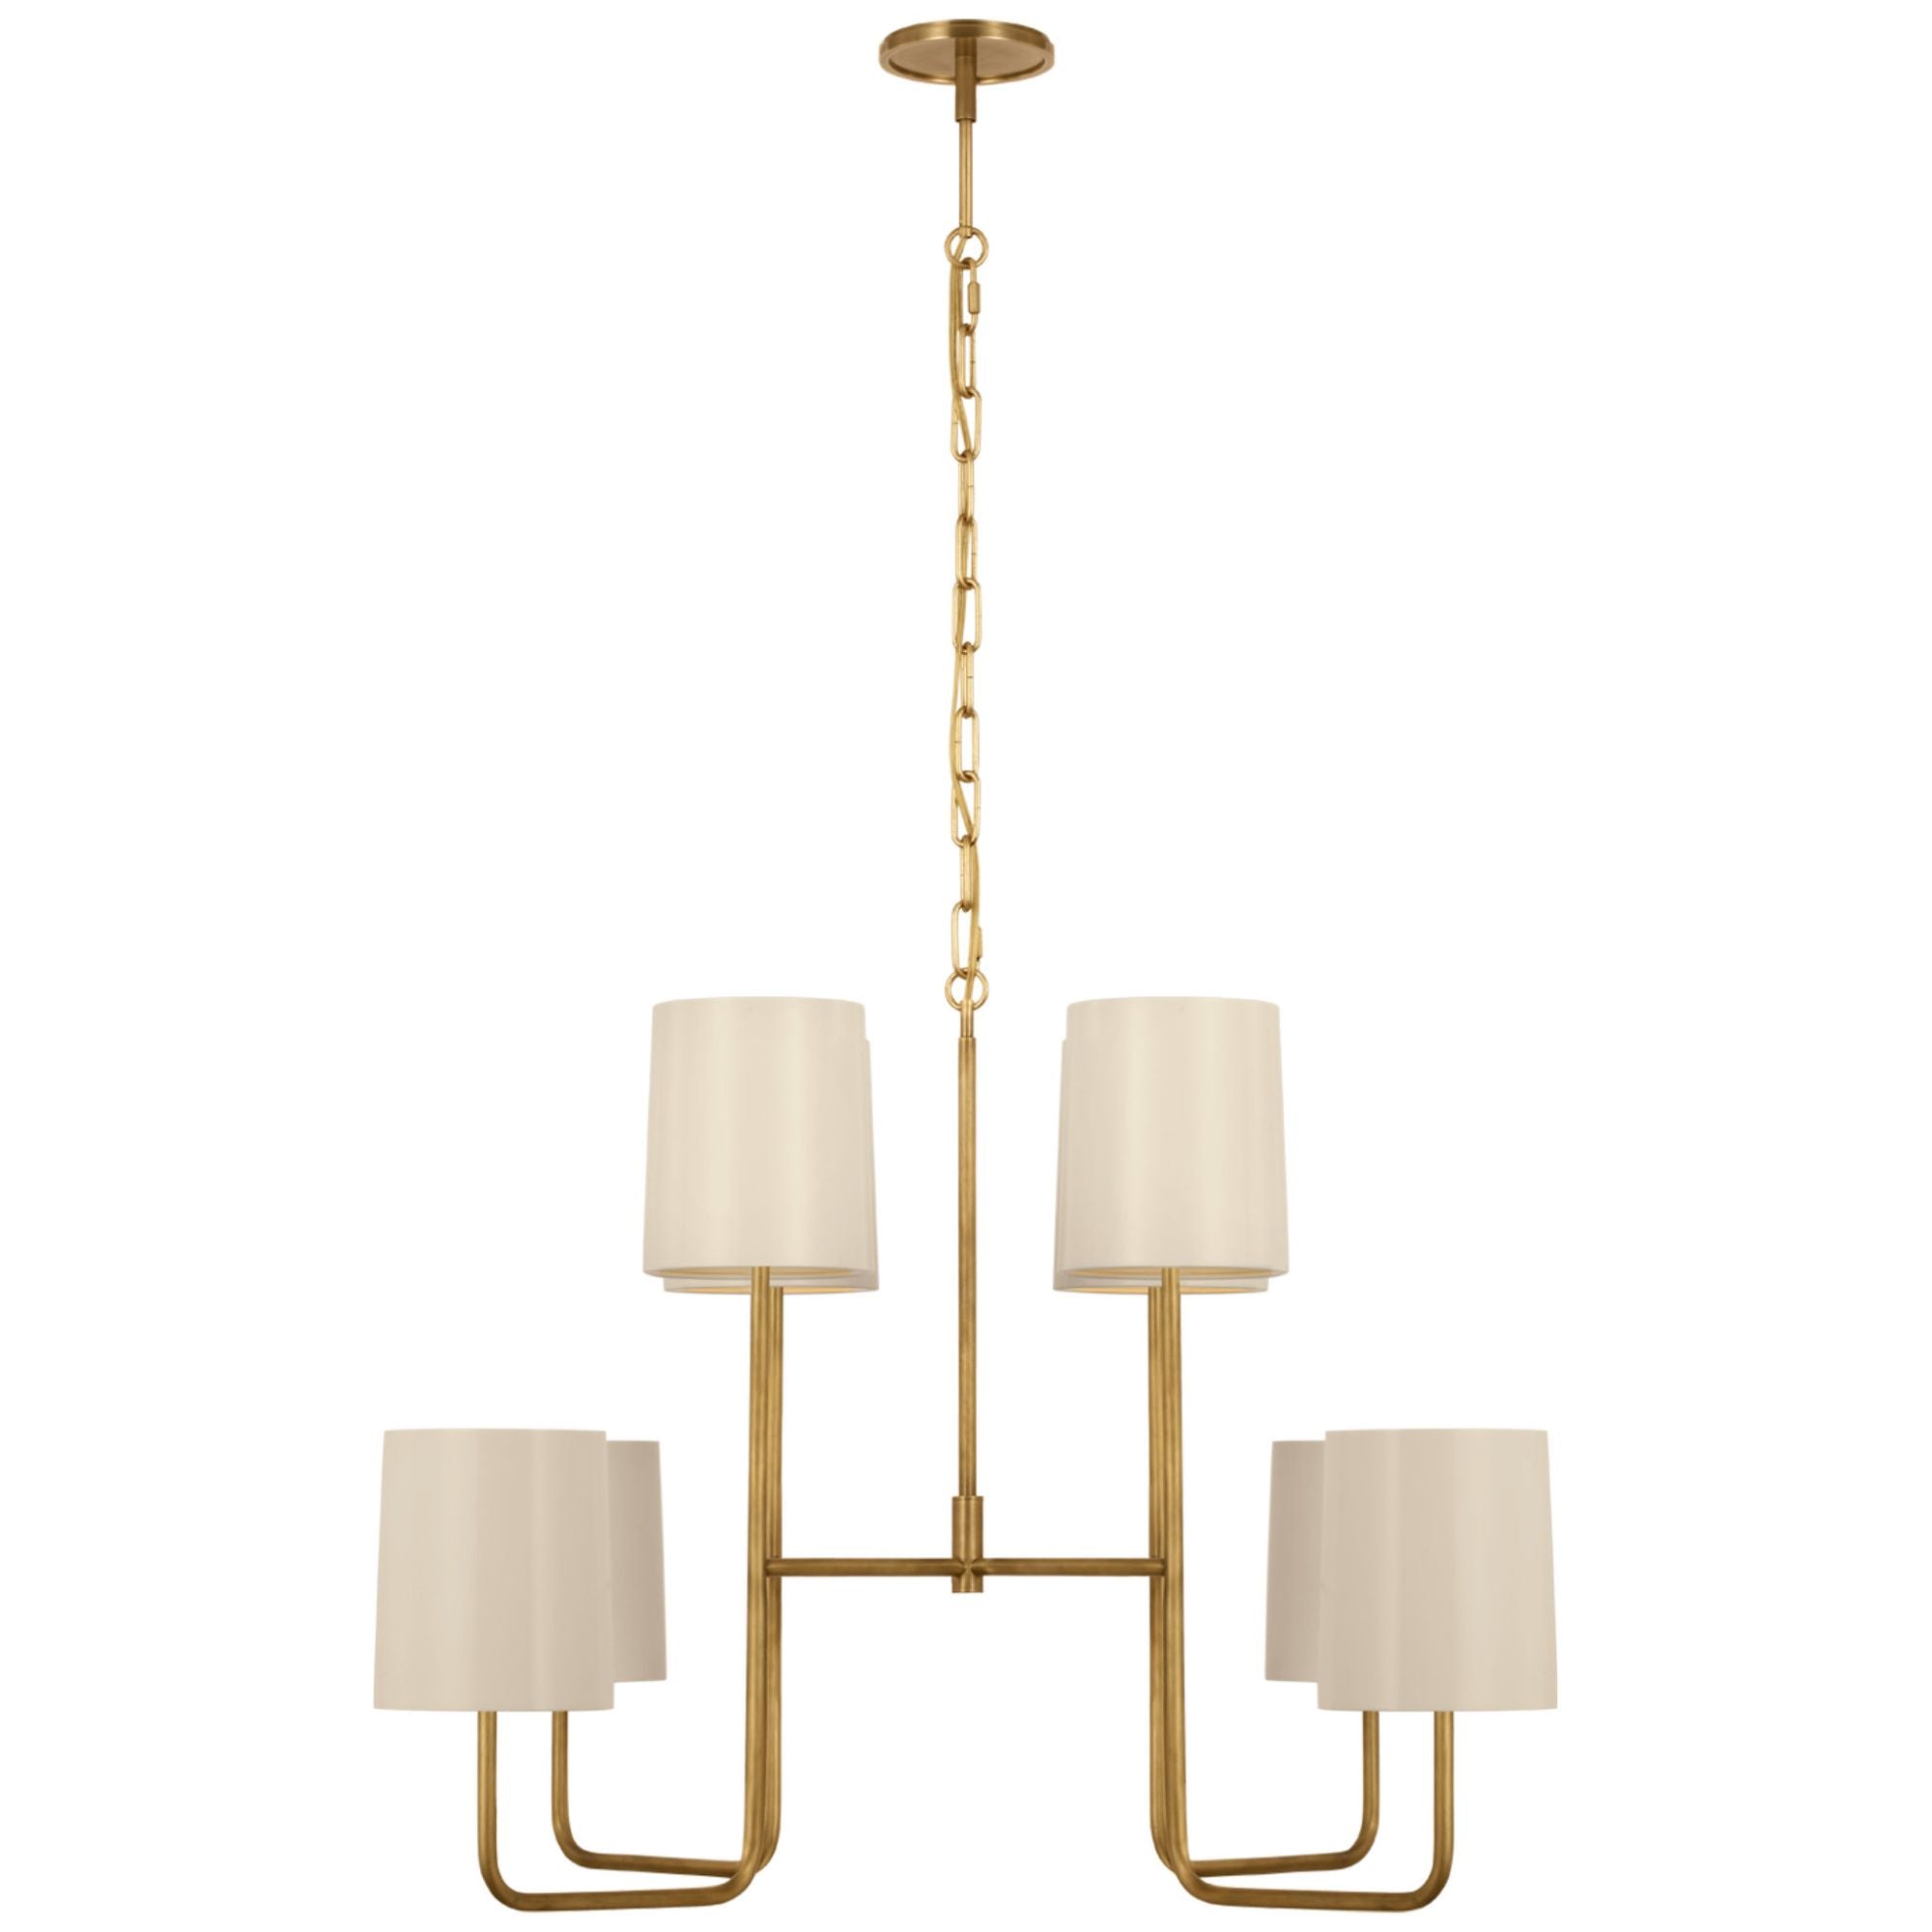 Barbara Barry Go Lightly Extra Large Two Tier Chandelier in Soft Brass with China White Shades